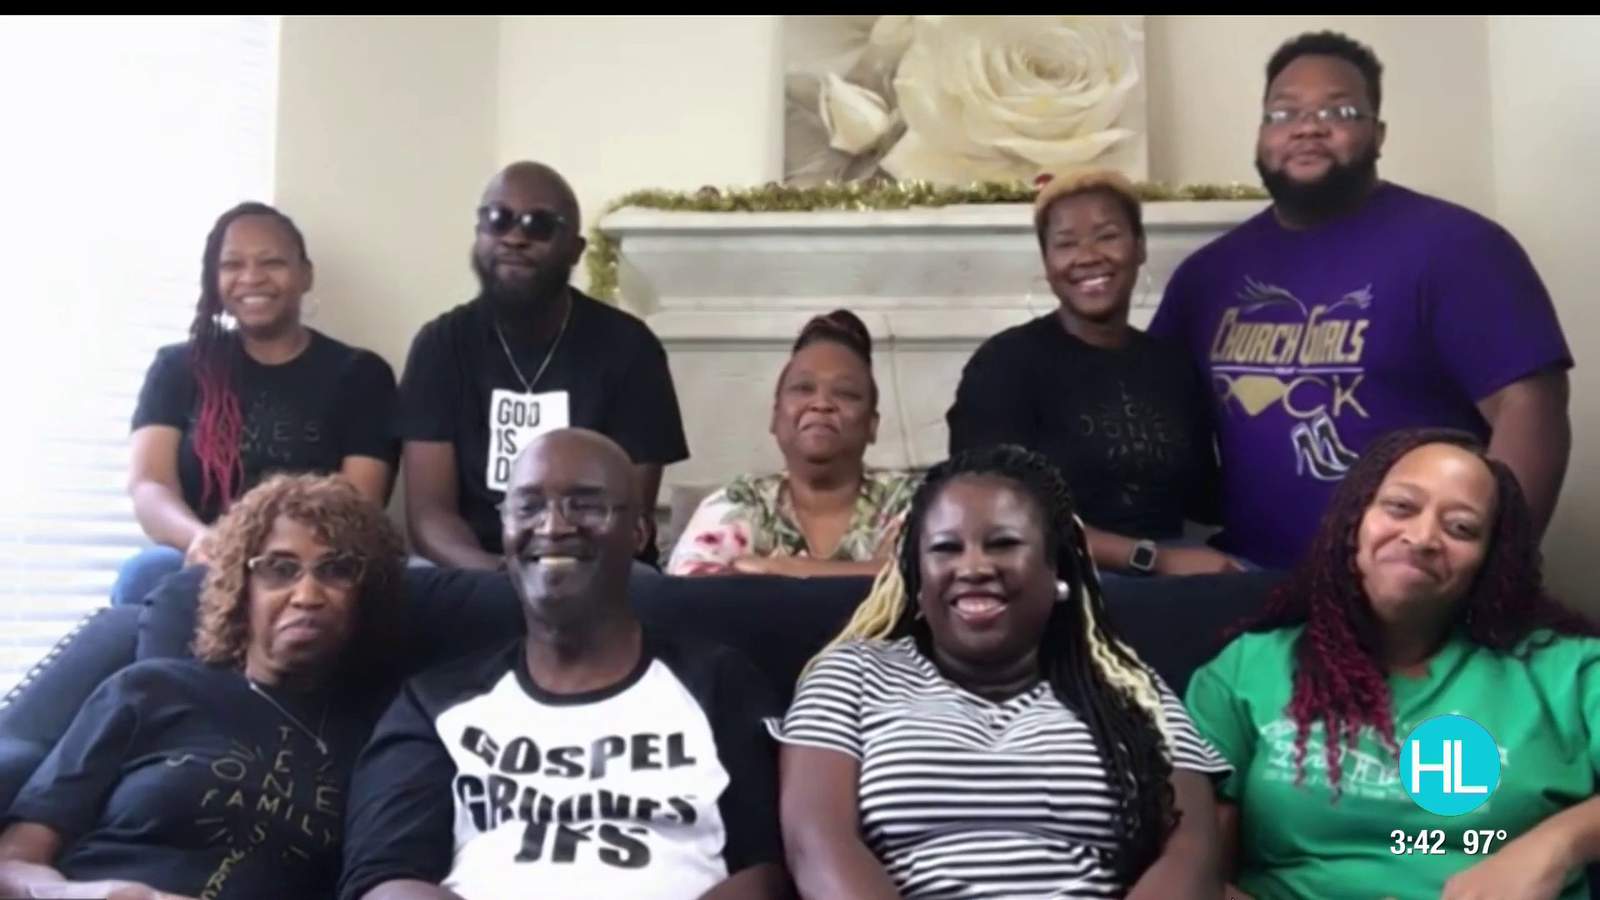 Houston-based gospel singing family finds strength in song to overcome COVID